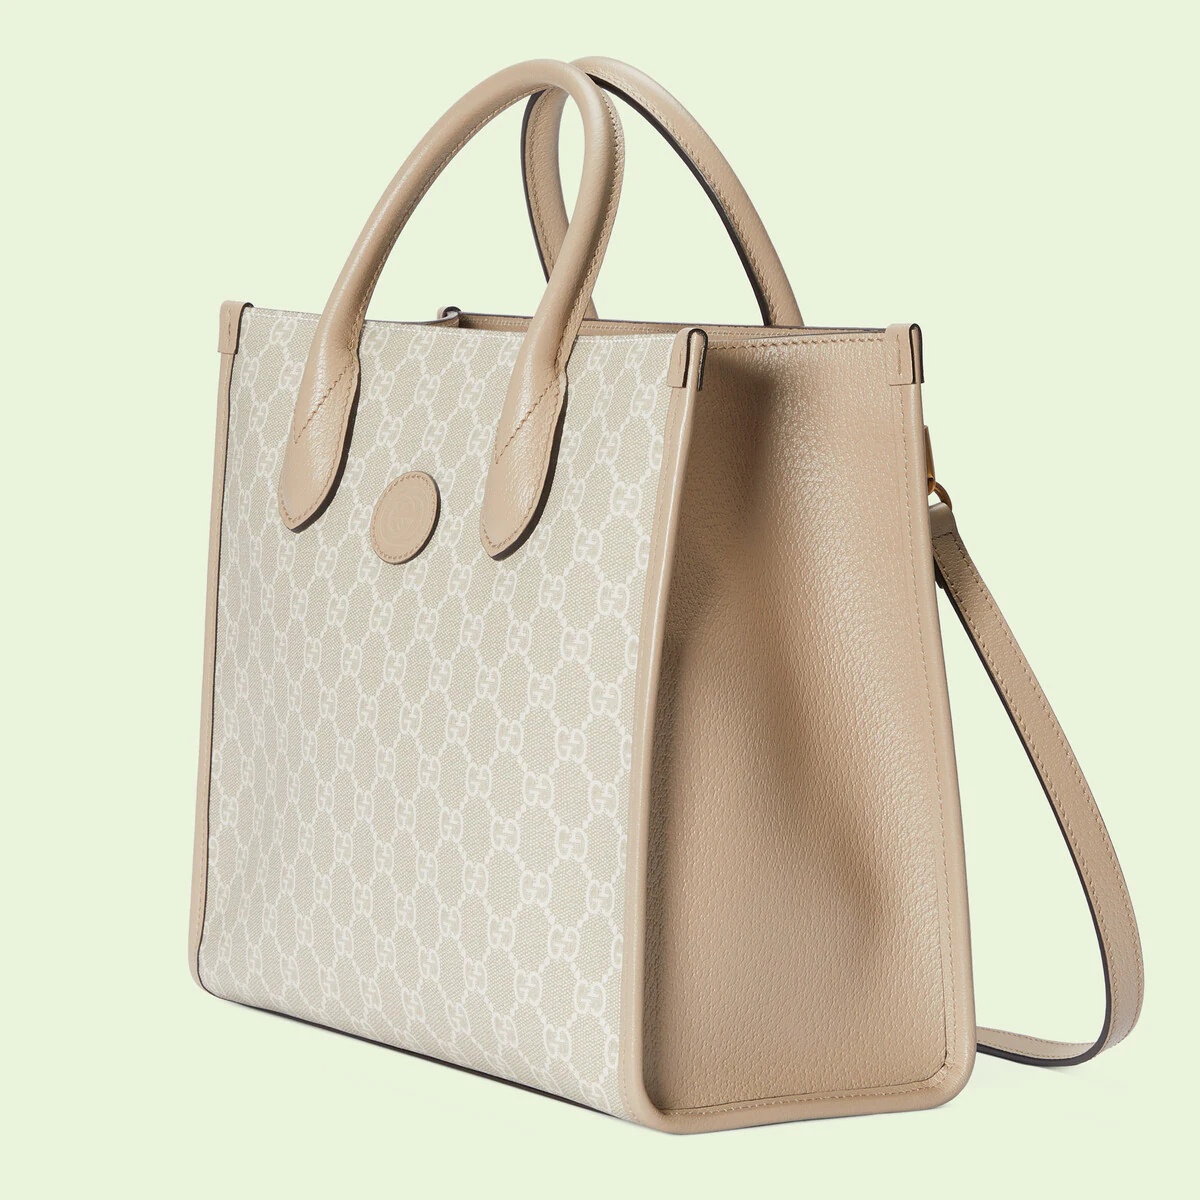 Small tote bag with Interlocking G - 1